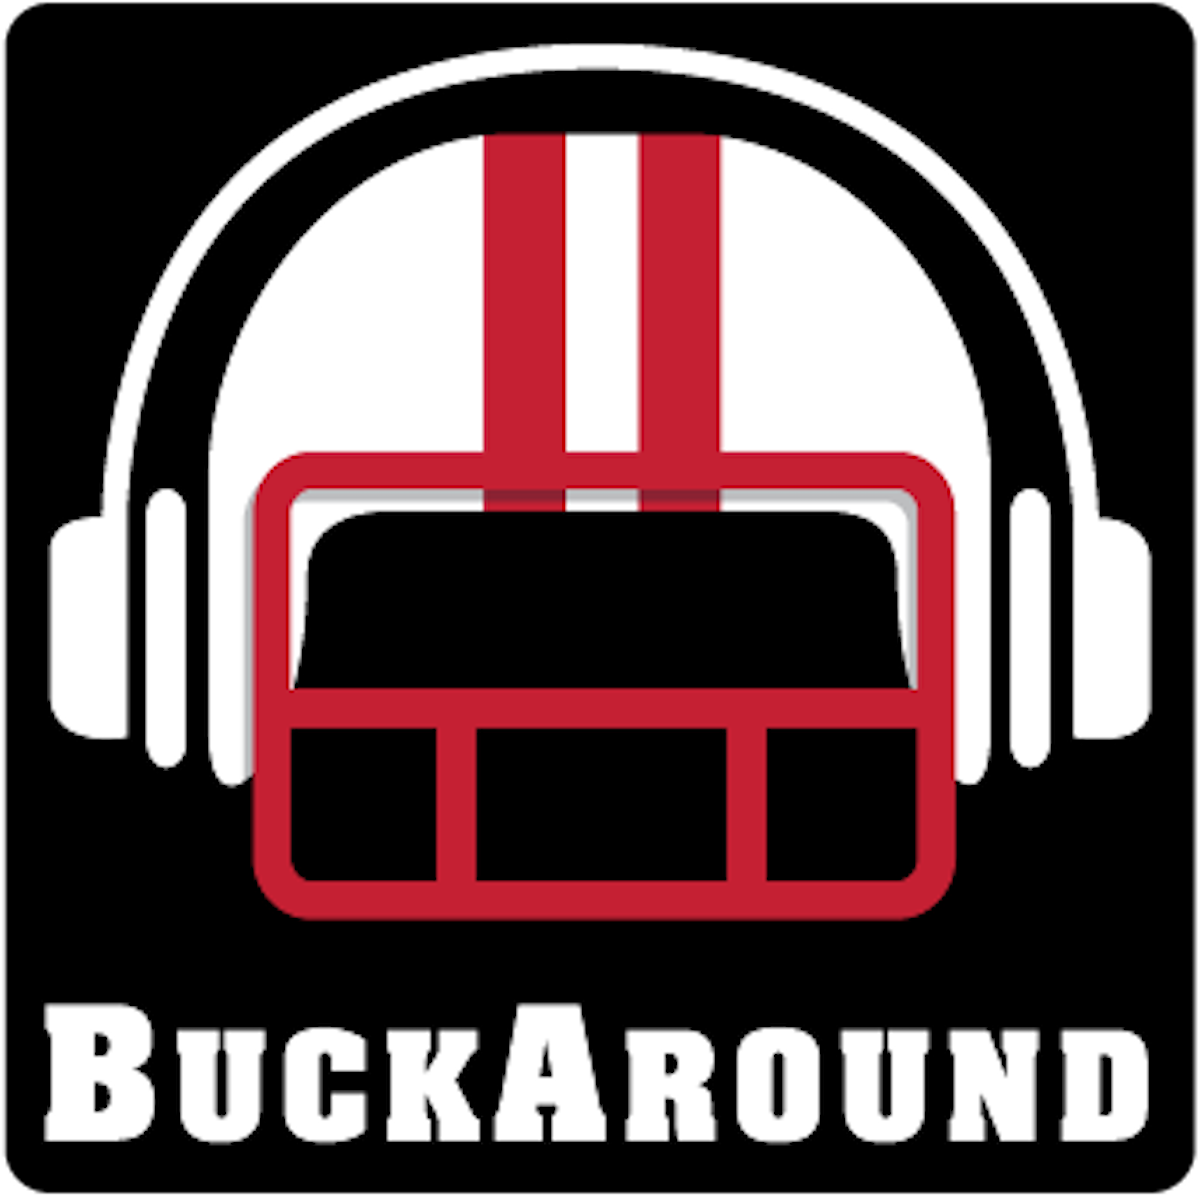 A Wisconsin Badgers Football Podcast Logo - Buckaround: A Wisconsin Badgers Football Podcast (1400x1400), Png Download